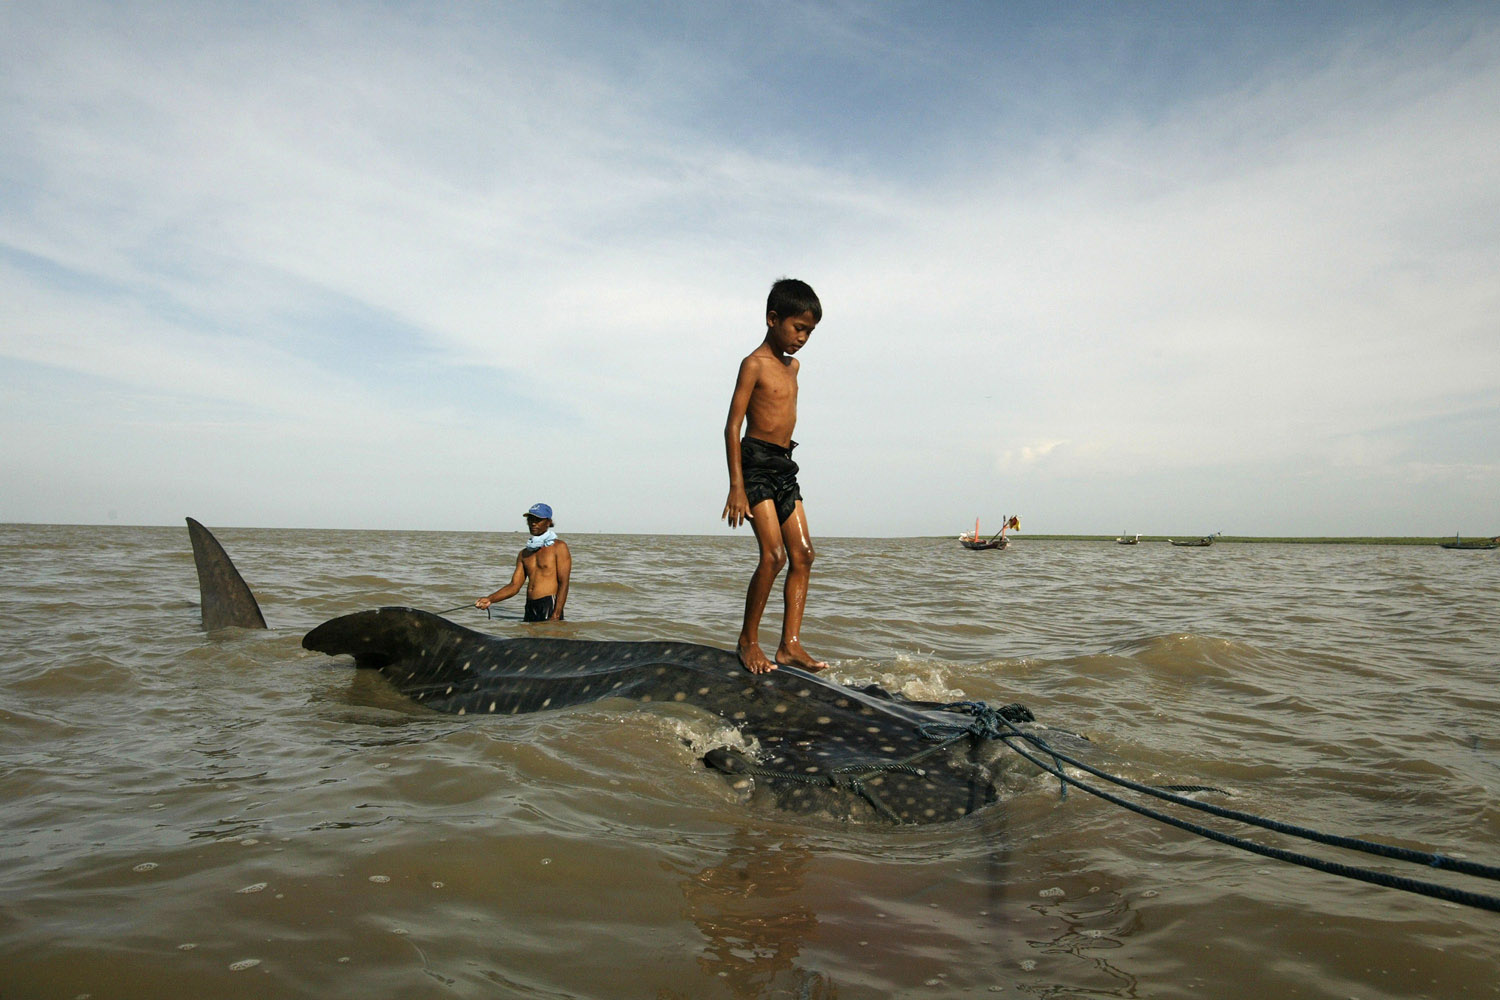 Oct. 22, 2013. A youth stands on a a whale shark towed by fishermen along the coast of Surabaya in eastern Java Island to be sold to prospective buyers after getting entangled in a fishing net.